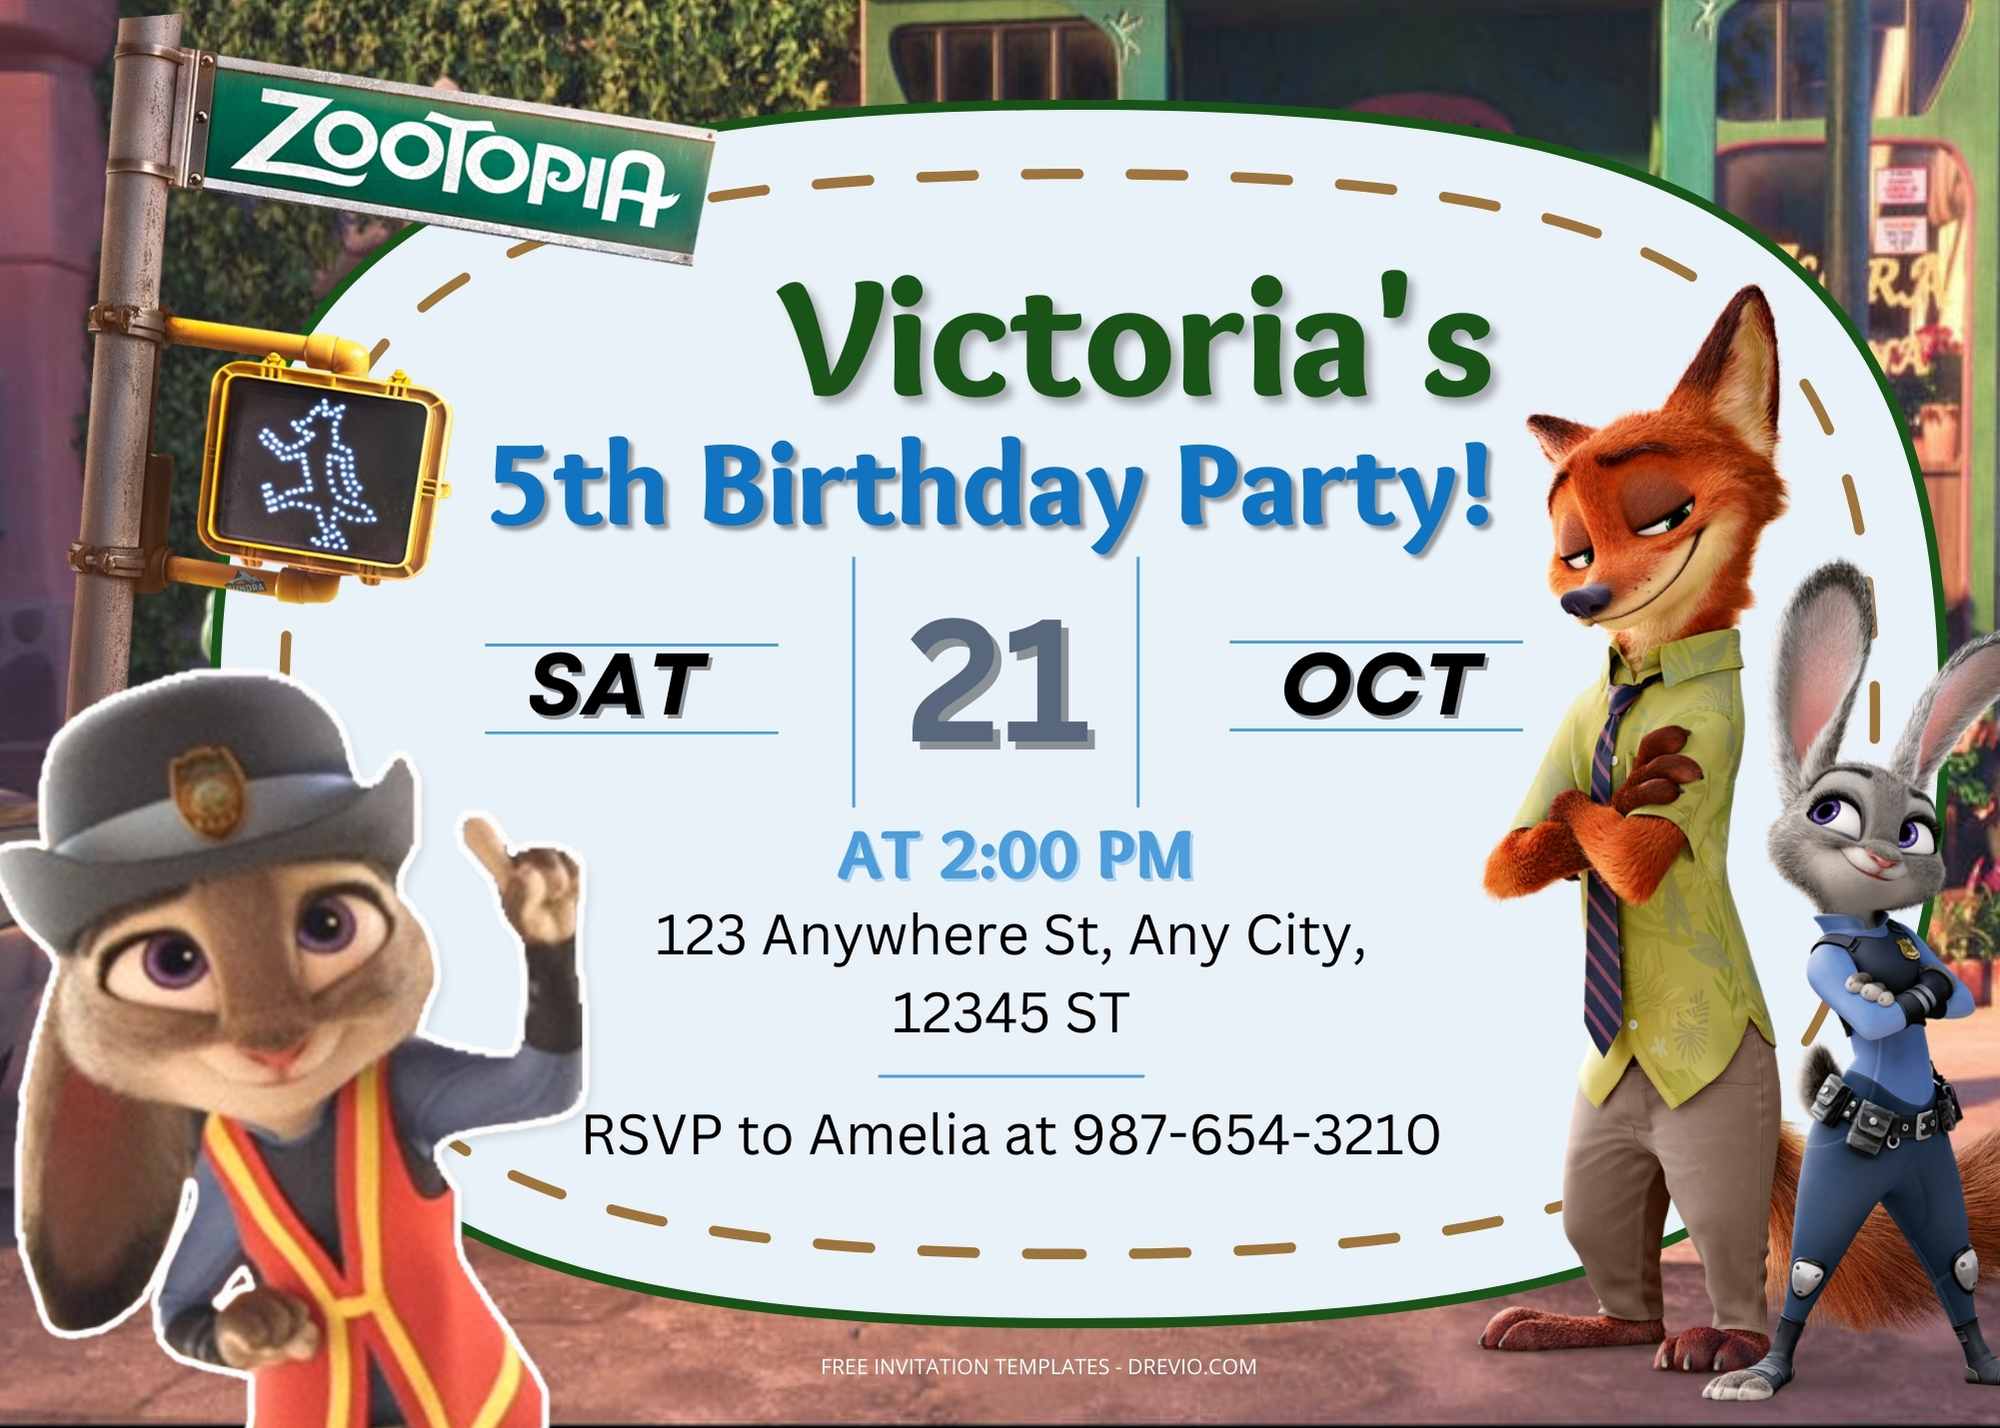 FREE Dance And Live With Zootopia Birthday Invitation Templates